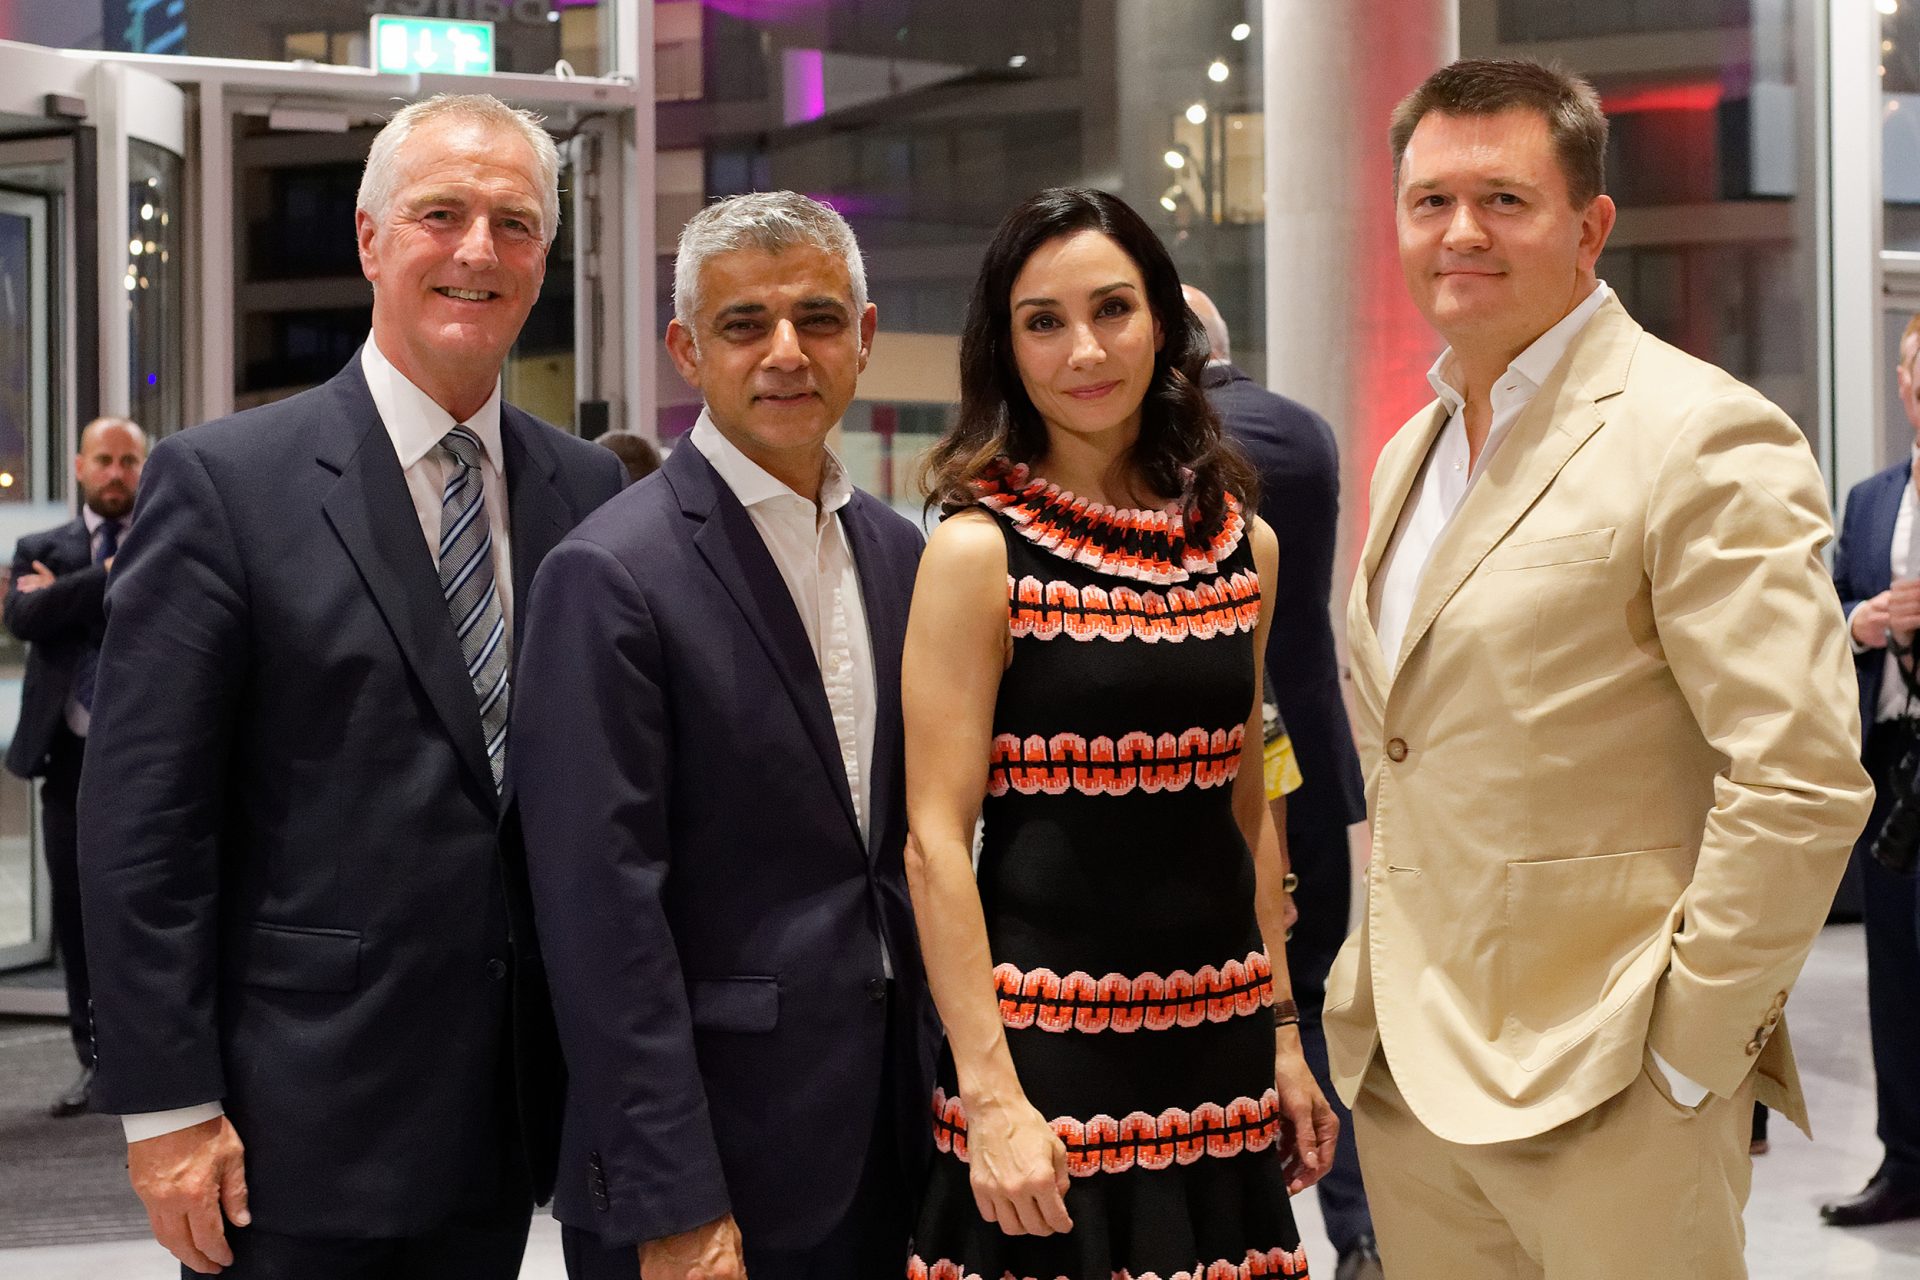 Justin Bickle (right) at the official opening of ENB's new building in 2019, with Vice Chair Grenville Turner, the Mayor of London Sadiq Khan and Tamara Rojo © Laurent Liotardo